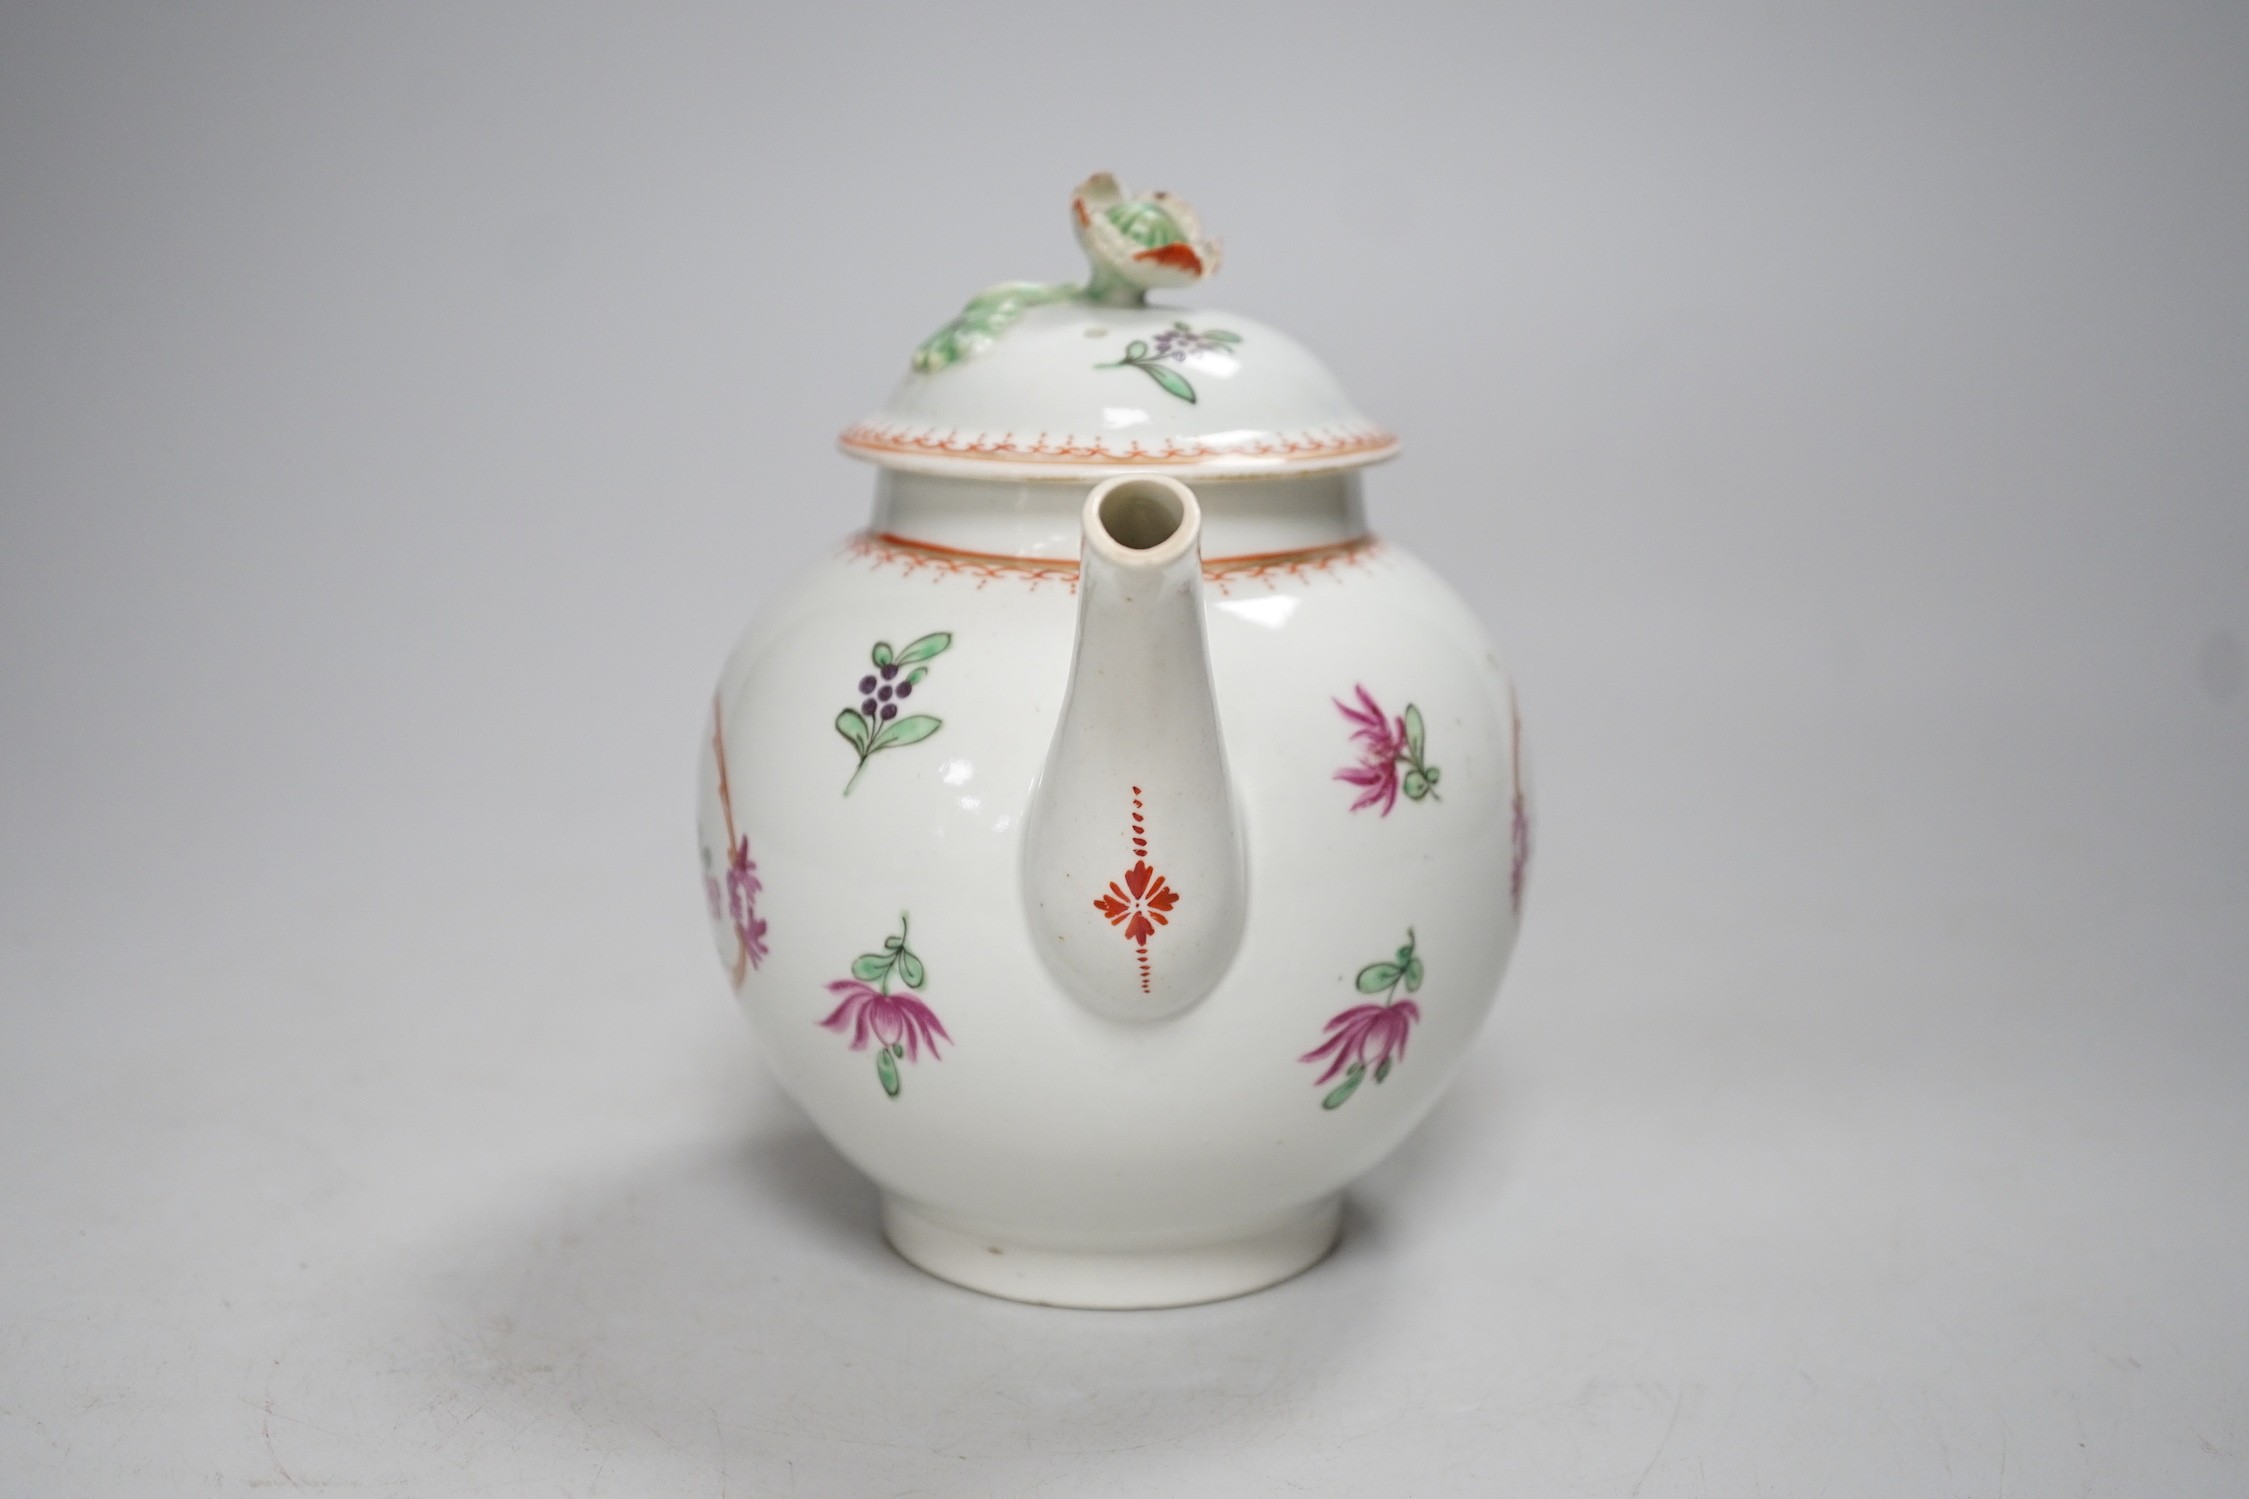 An 18th century Worcester teapot and cover painted in Chinese export style with flowers in an oval panel. 16cm tall